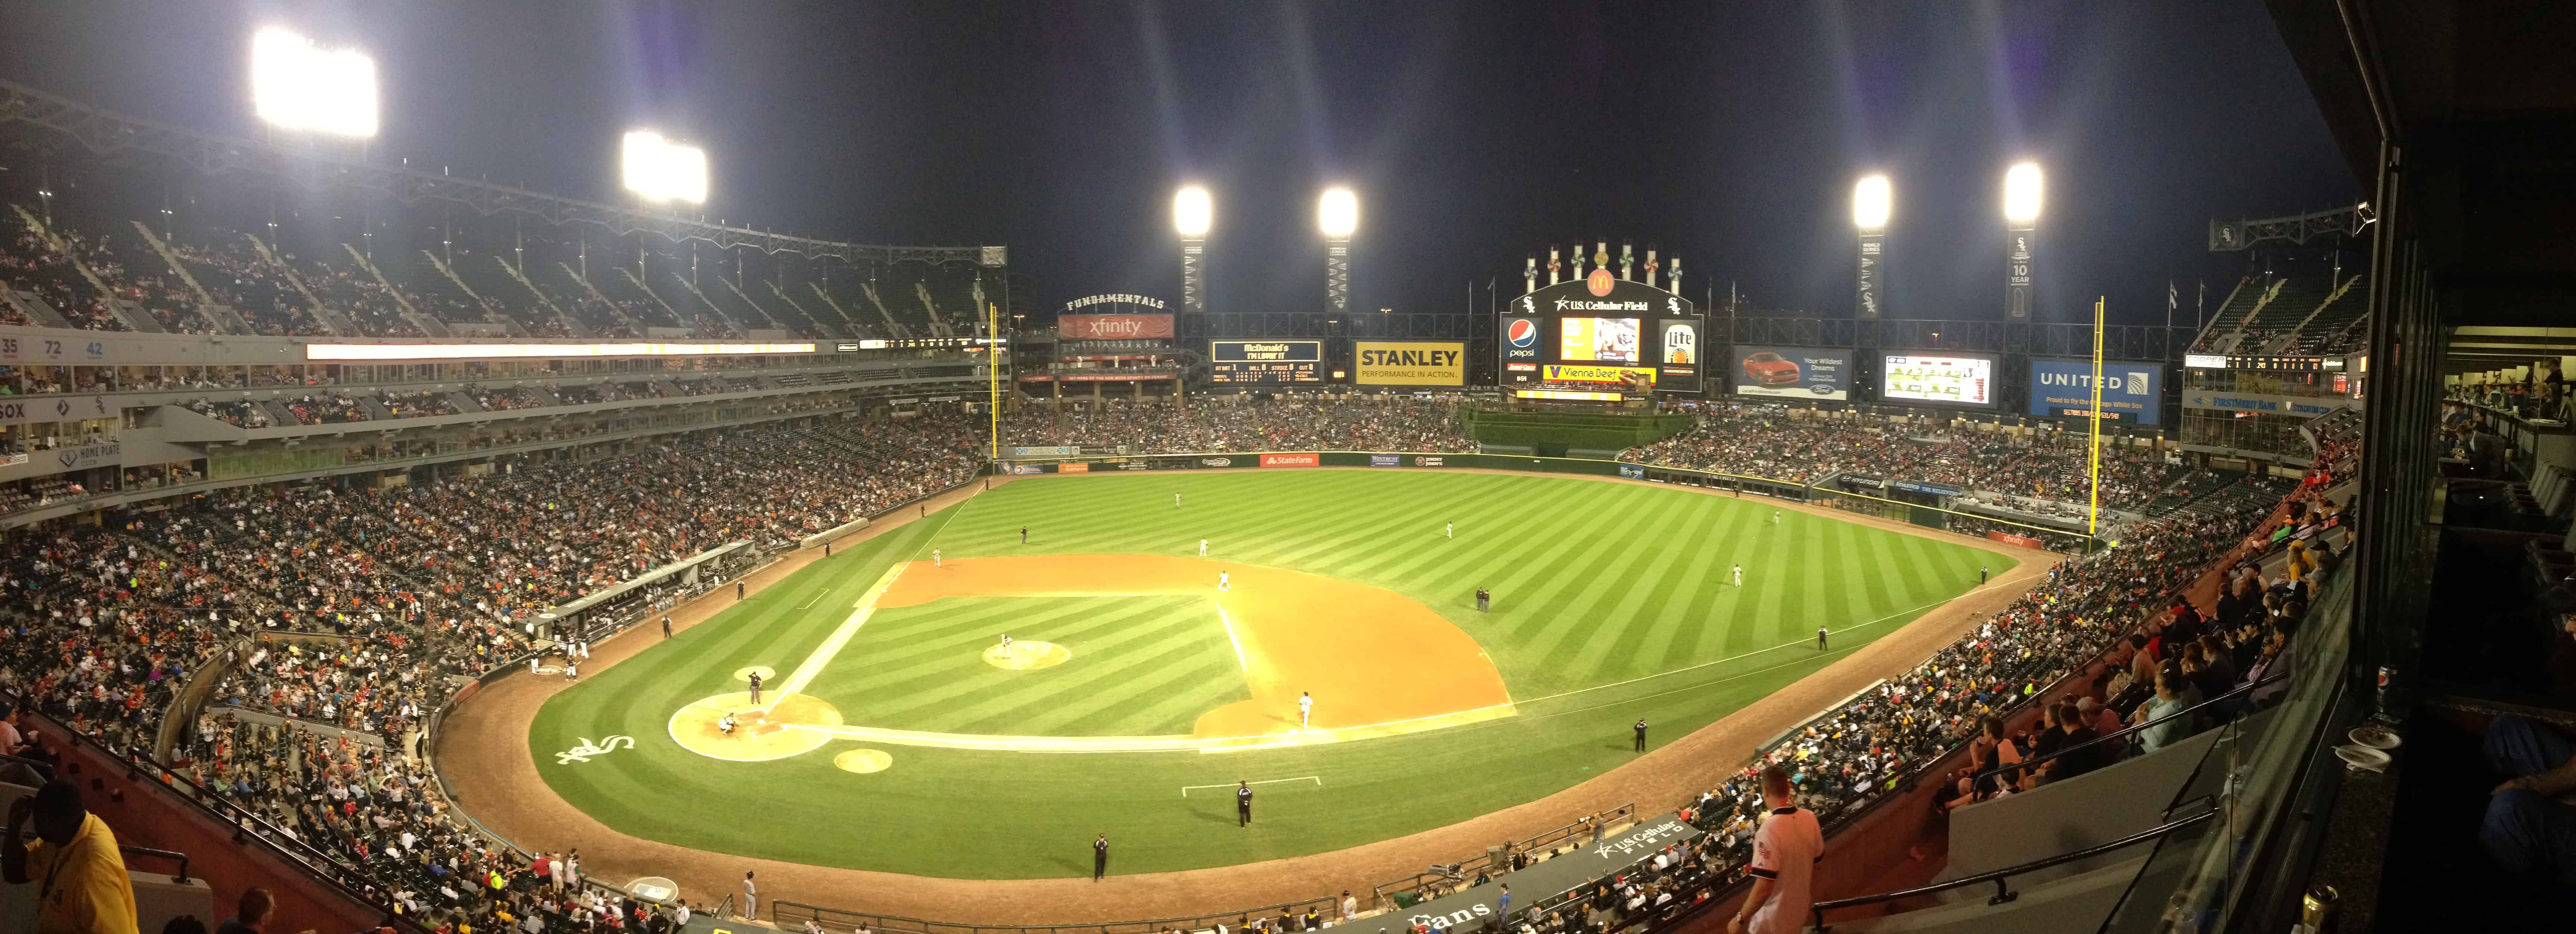 Guaranteed Rate Field in Chicago, Illinois